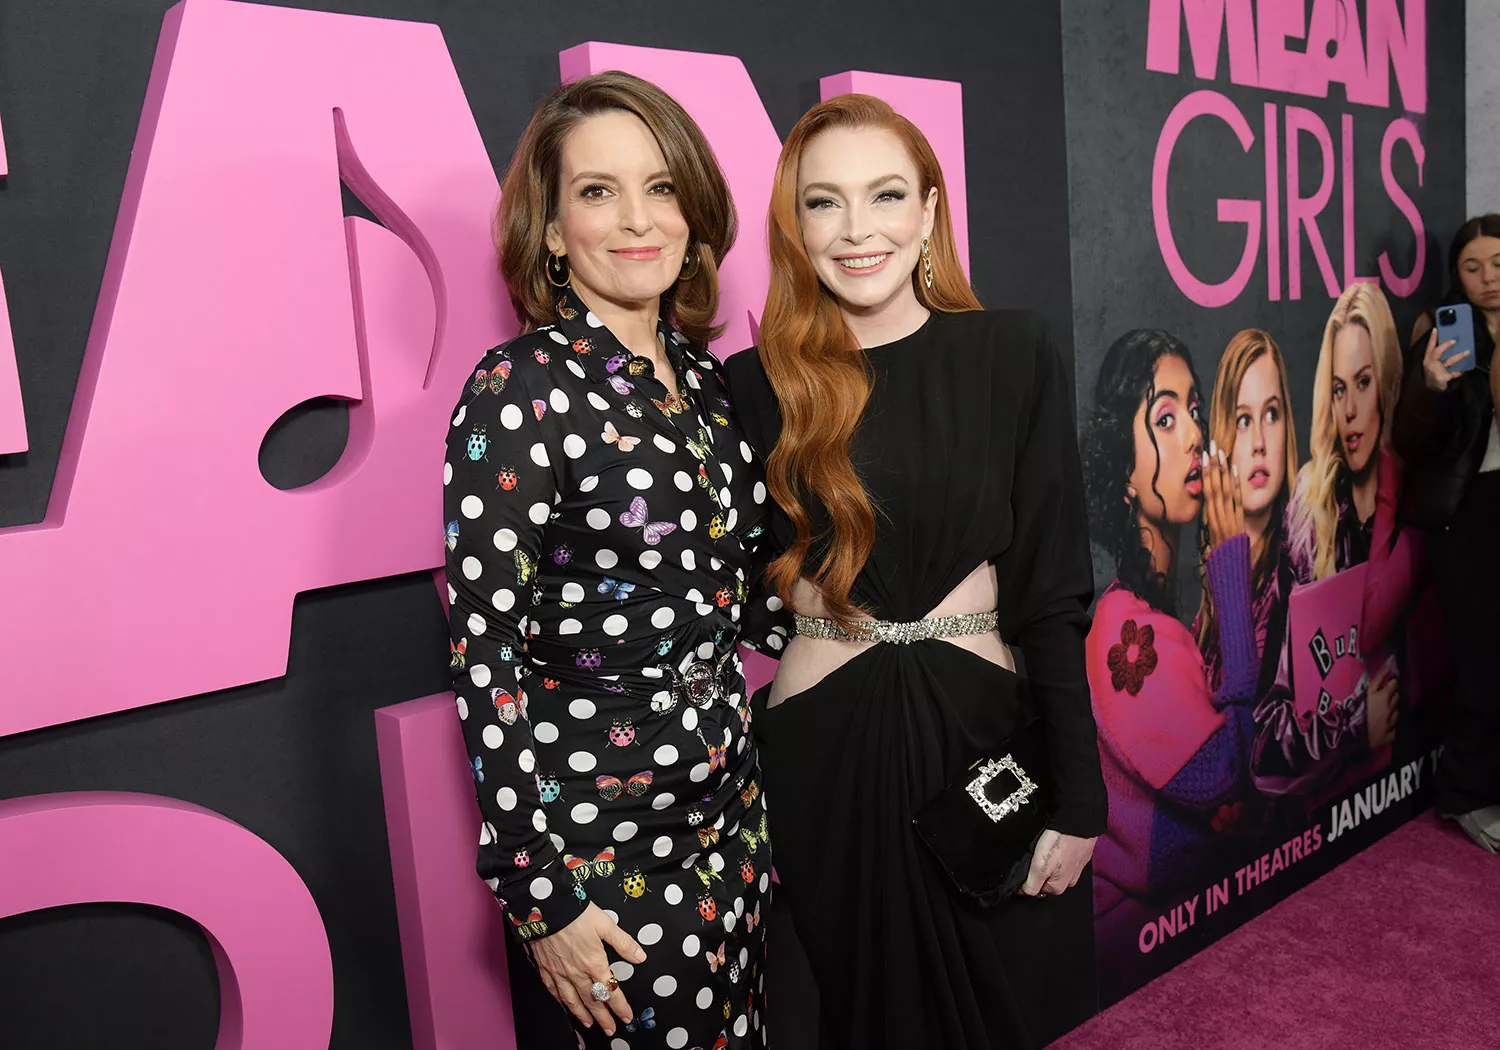 Tina Fey and Lindsay Lohan at the 'Mean Girls' premiere